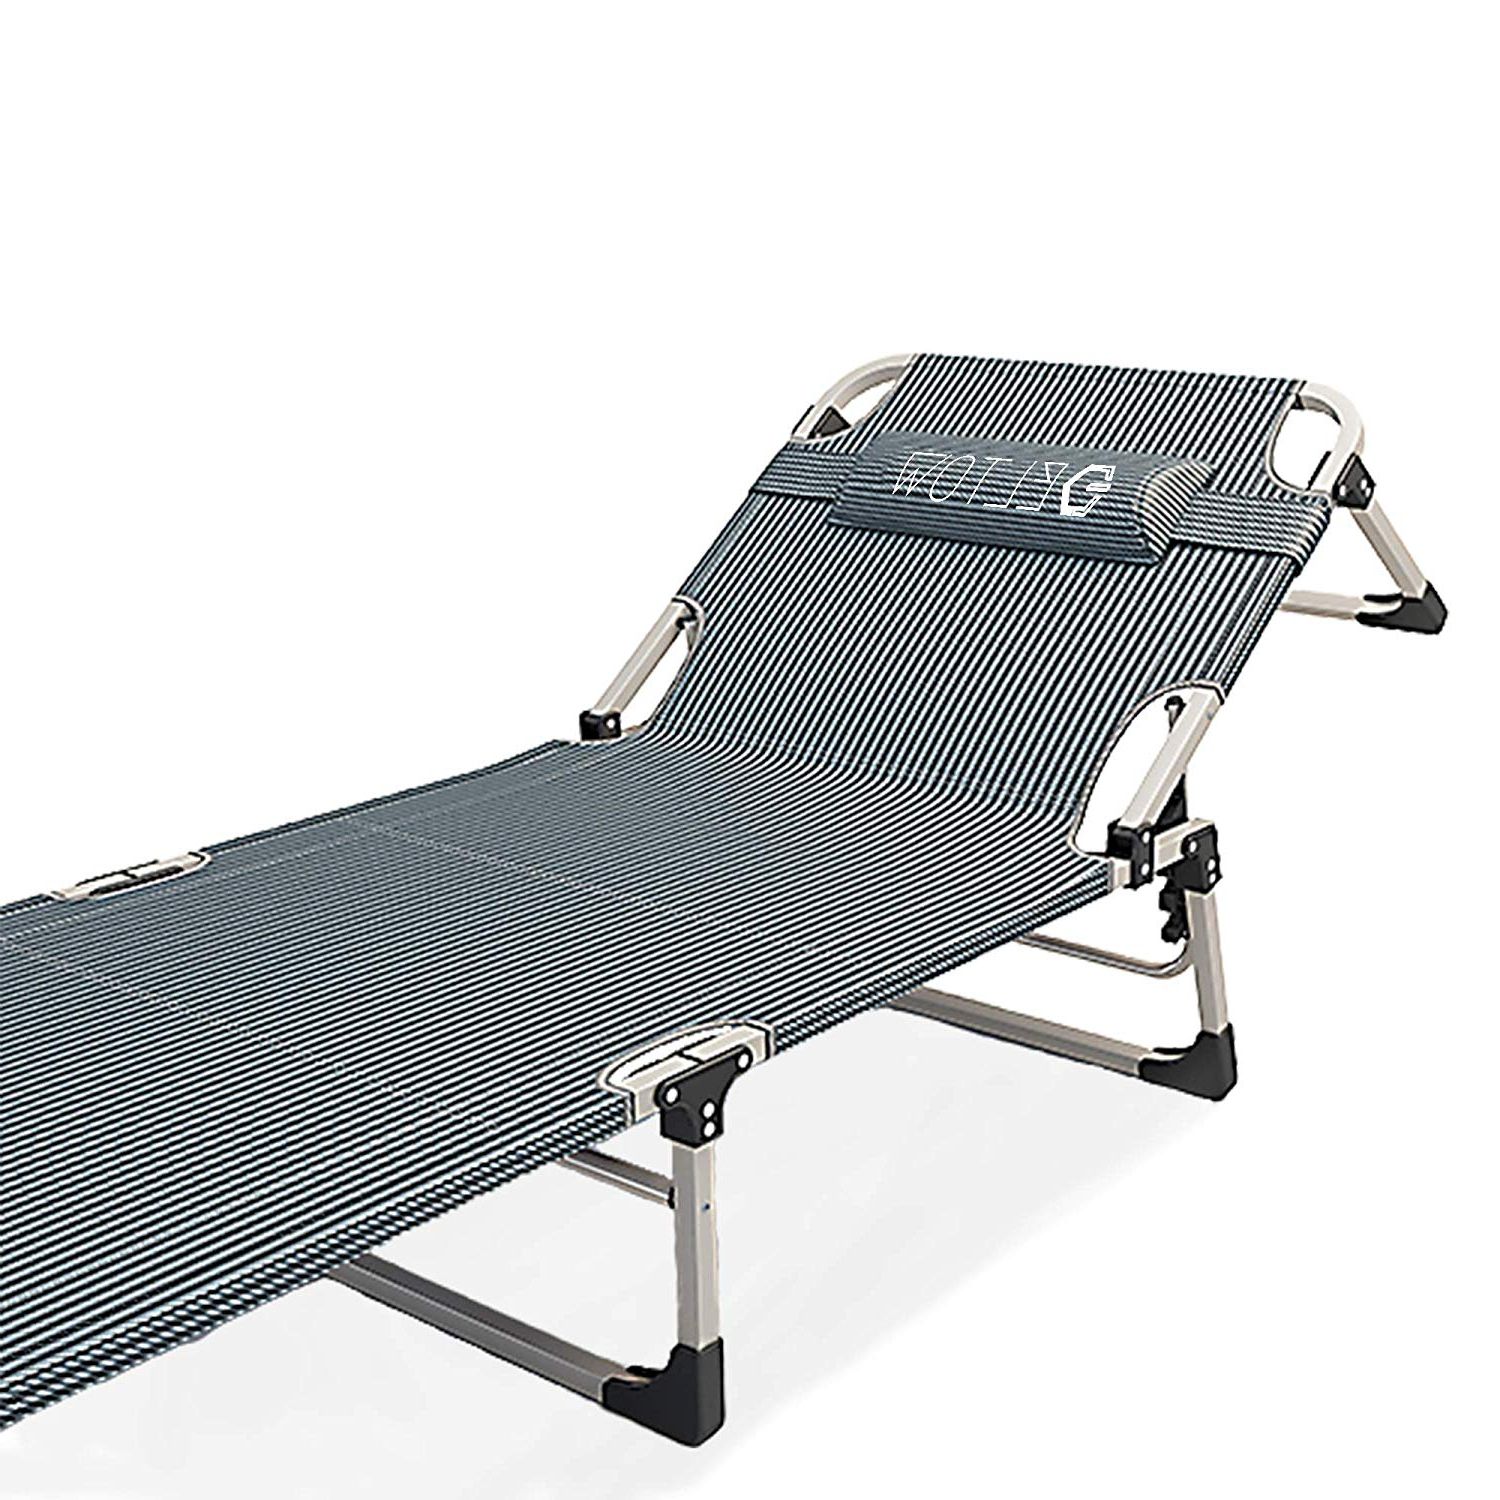 Most Up To Date 3 Position Portable Folding Reclining Beach Chaise Lounges Throughout Eltow Portable Folding Camping Cot – Reclining Beach & Pool Lounger With  Oxford Cloth & Steel Frame – Outdoor Chaise Chair Bed For Patio, Garden,  Yard (View 22 of 25)